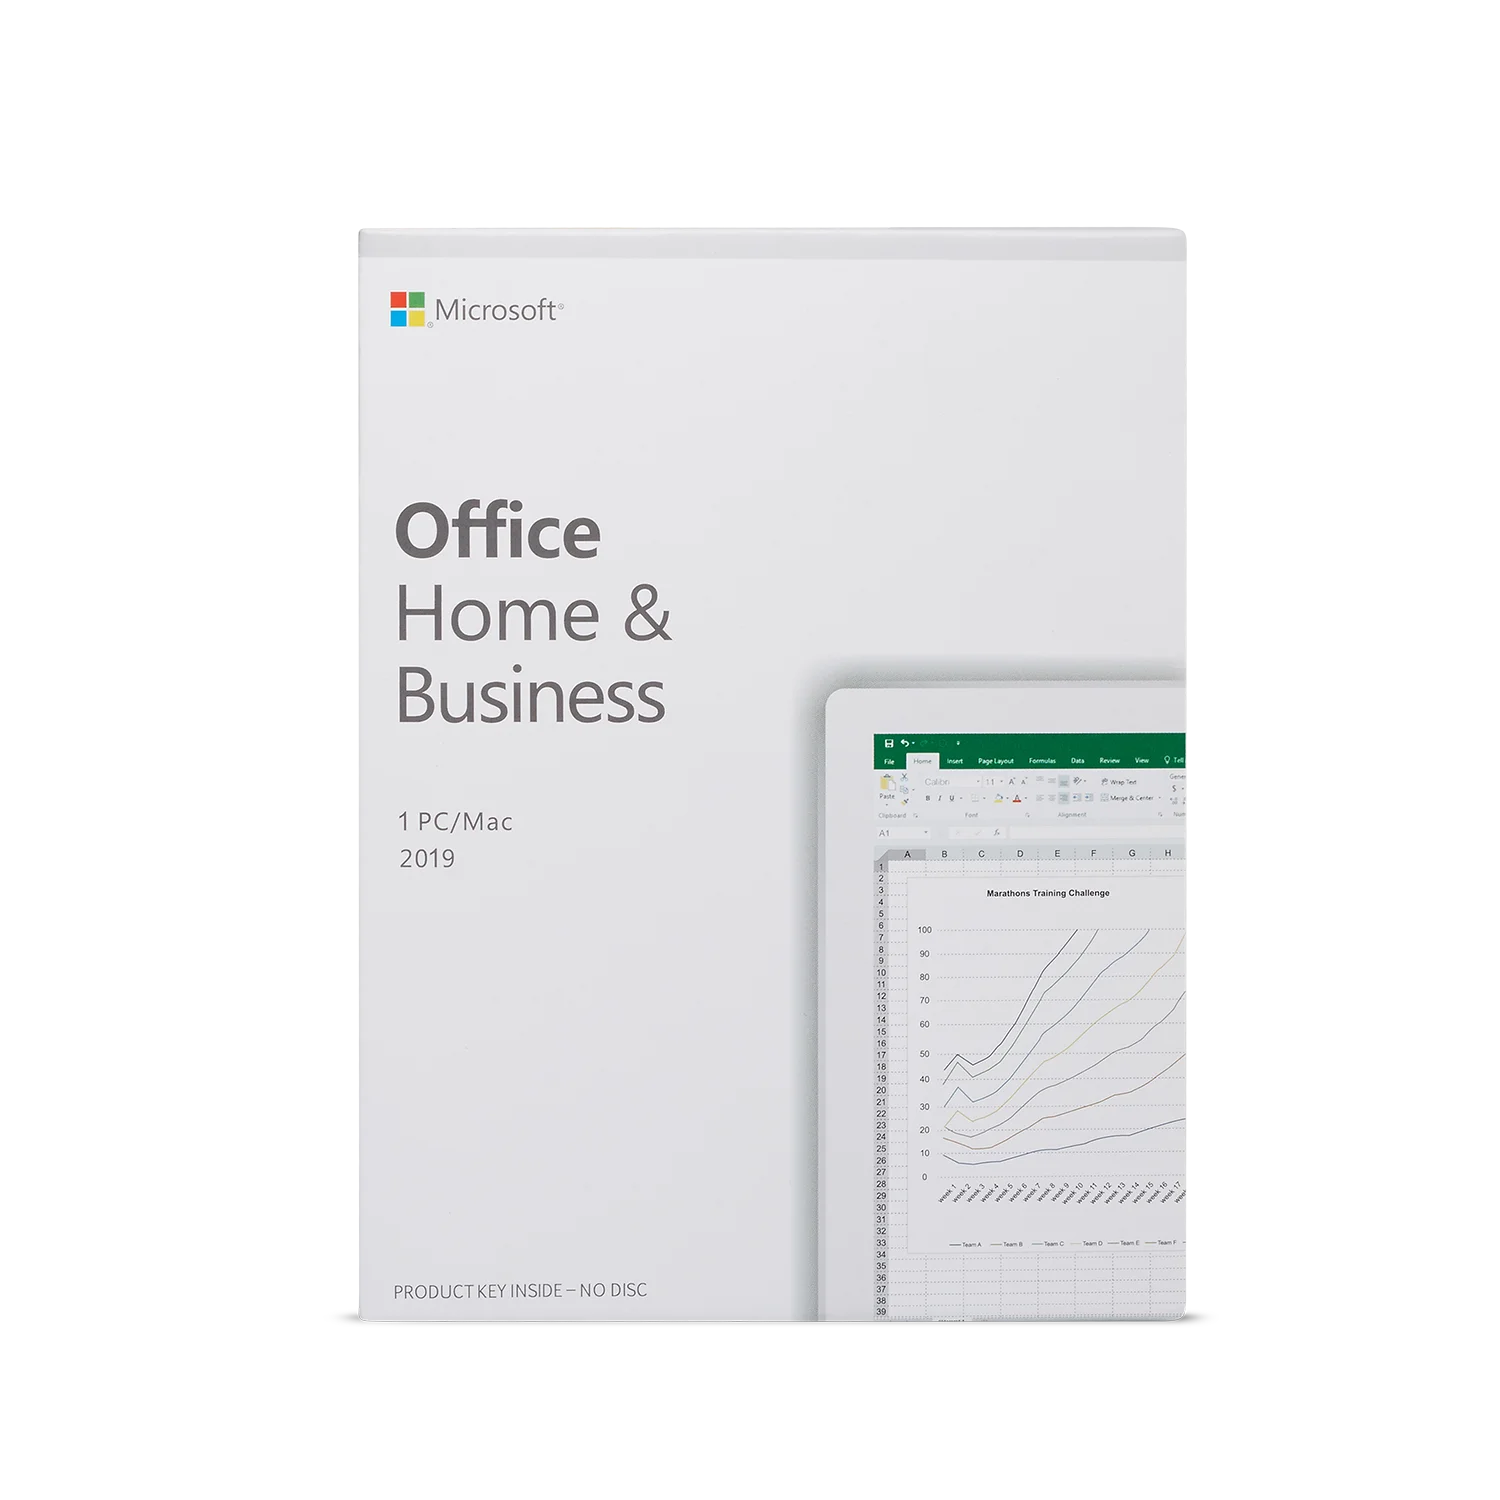 

Hot sale Microsoft Office Home and Business 2019 Licence Key for Windows 10 Pro Home Activated by Telephone HB Download Code